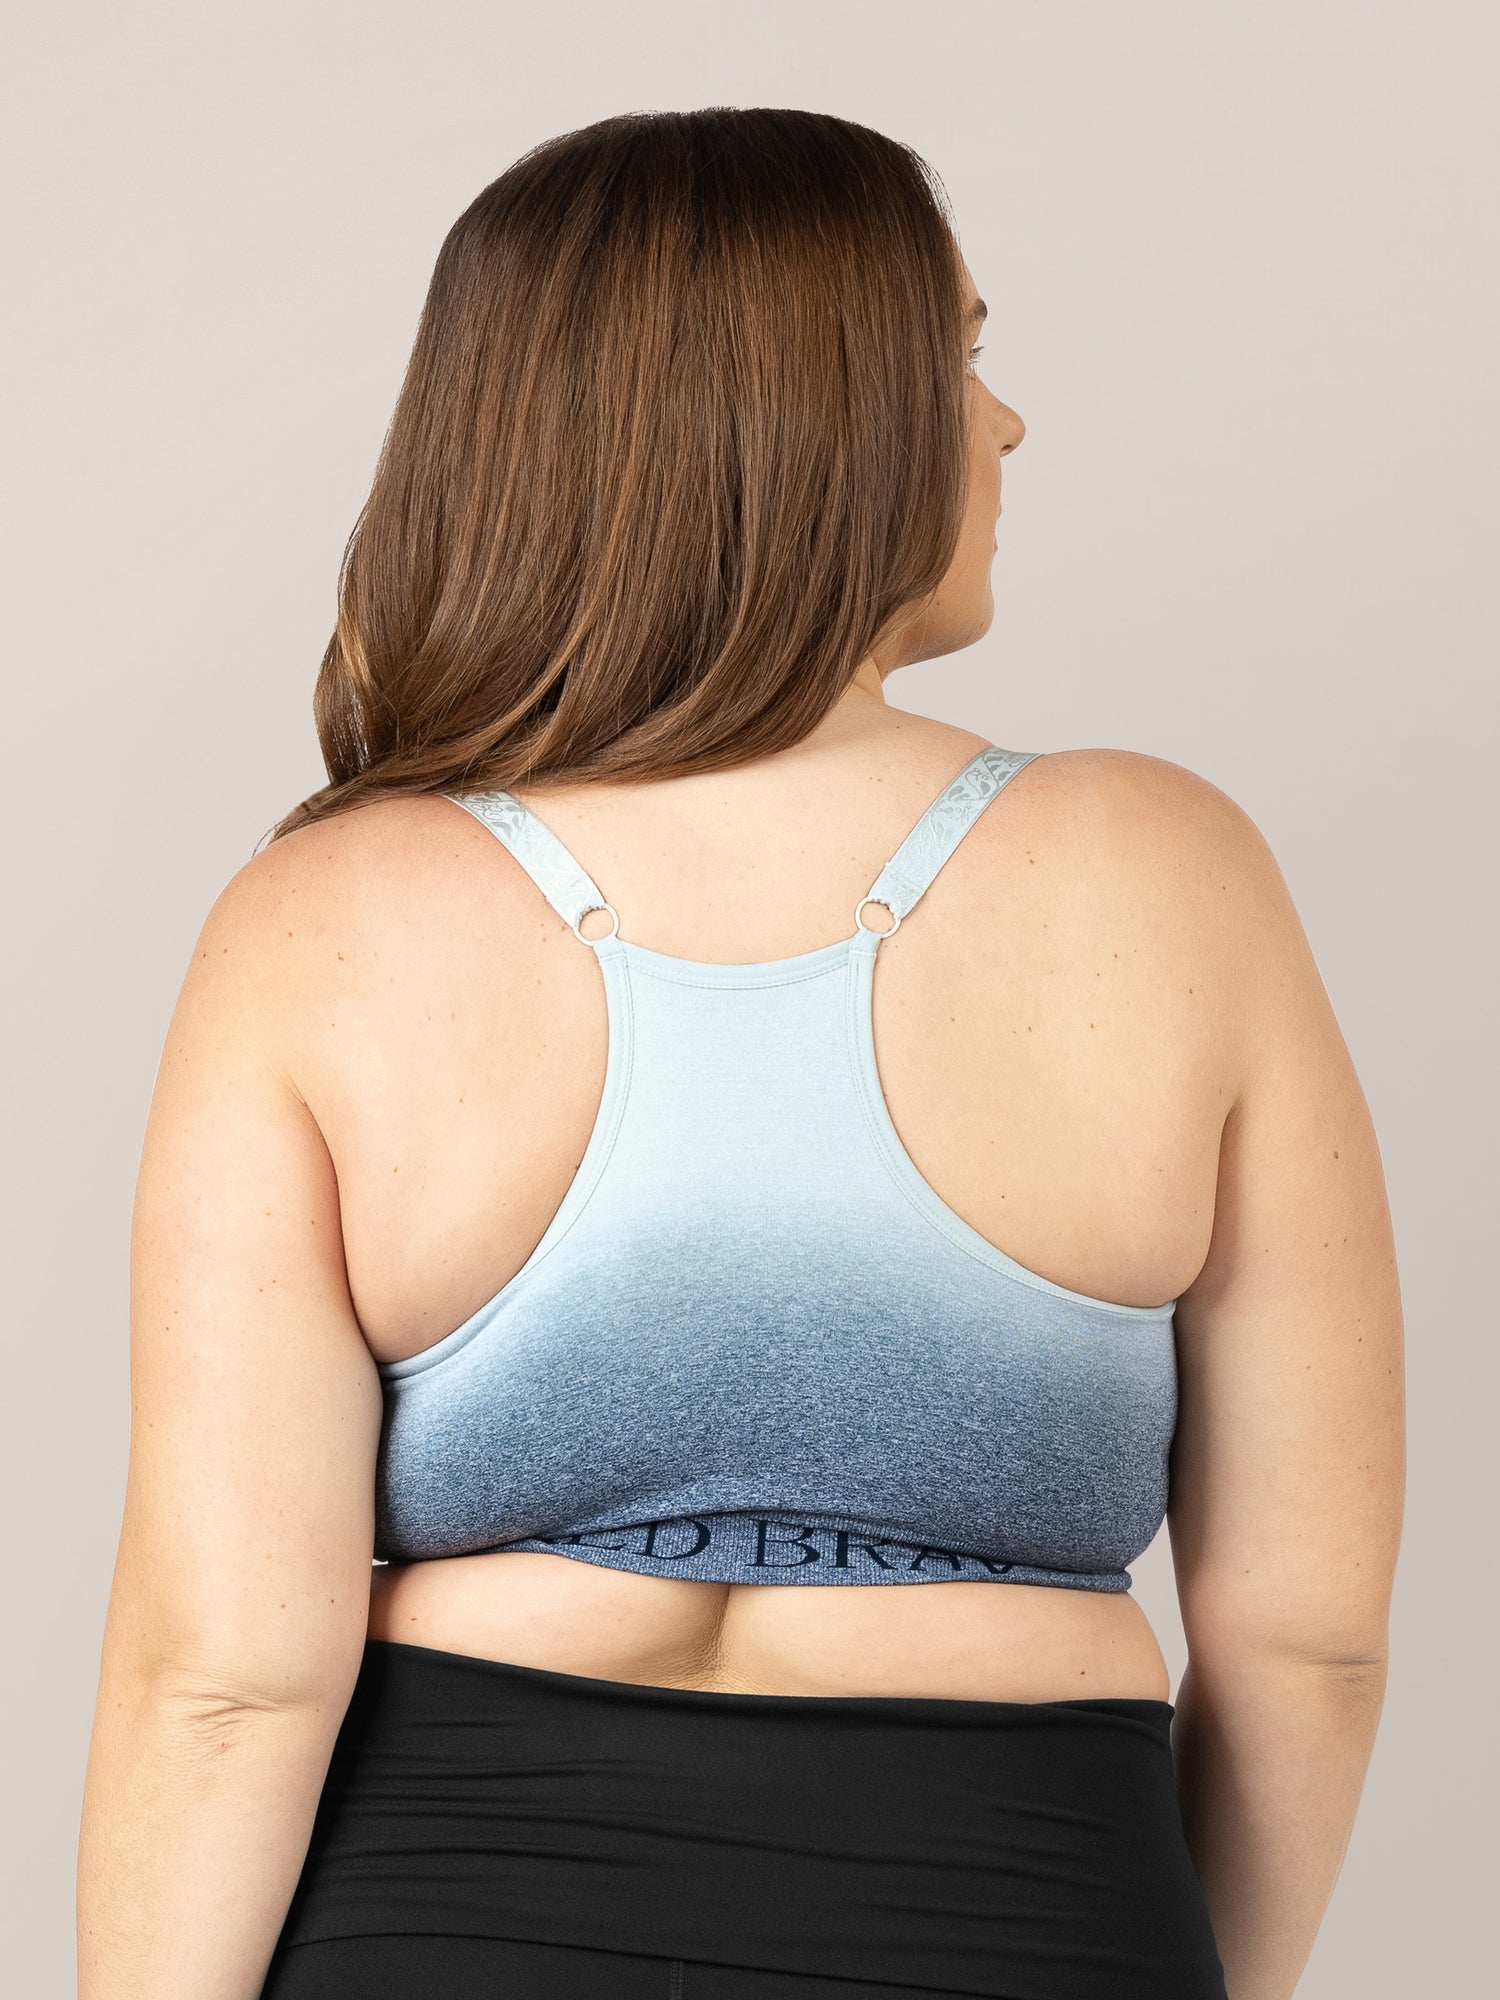 Kindred Bravely Sublime Busty Sports Nursing Bra  Seamless Maternity  Sports Bras for E, F, G, H, I Cups (Black, Small-Busty) at  Women's  Clothing store